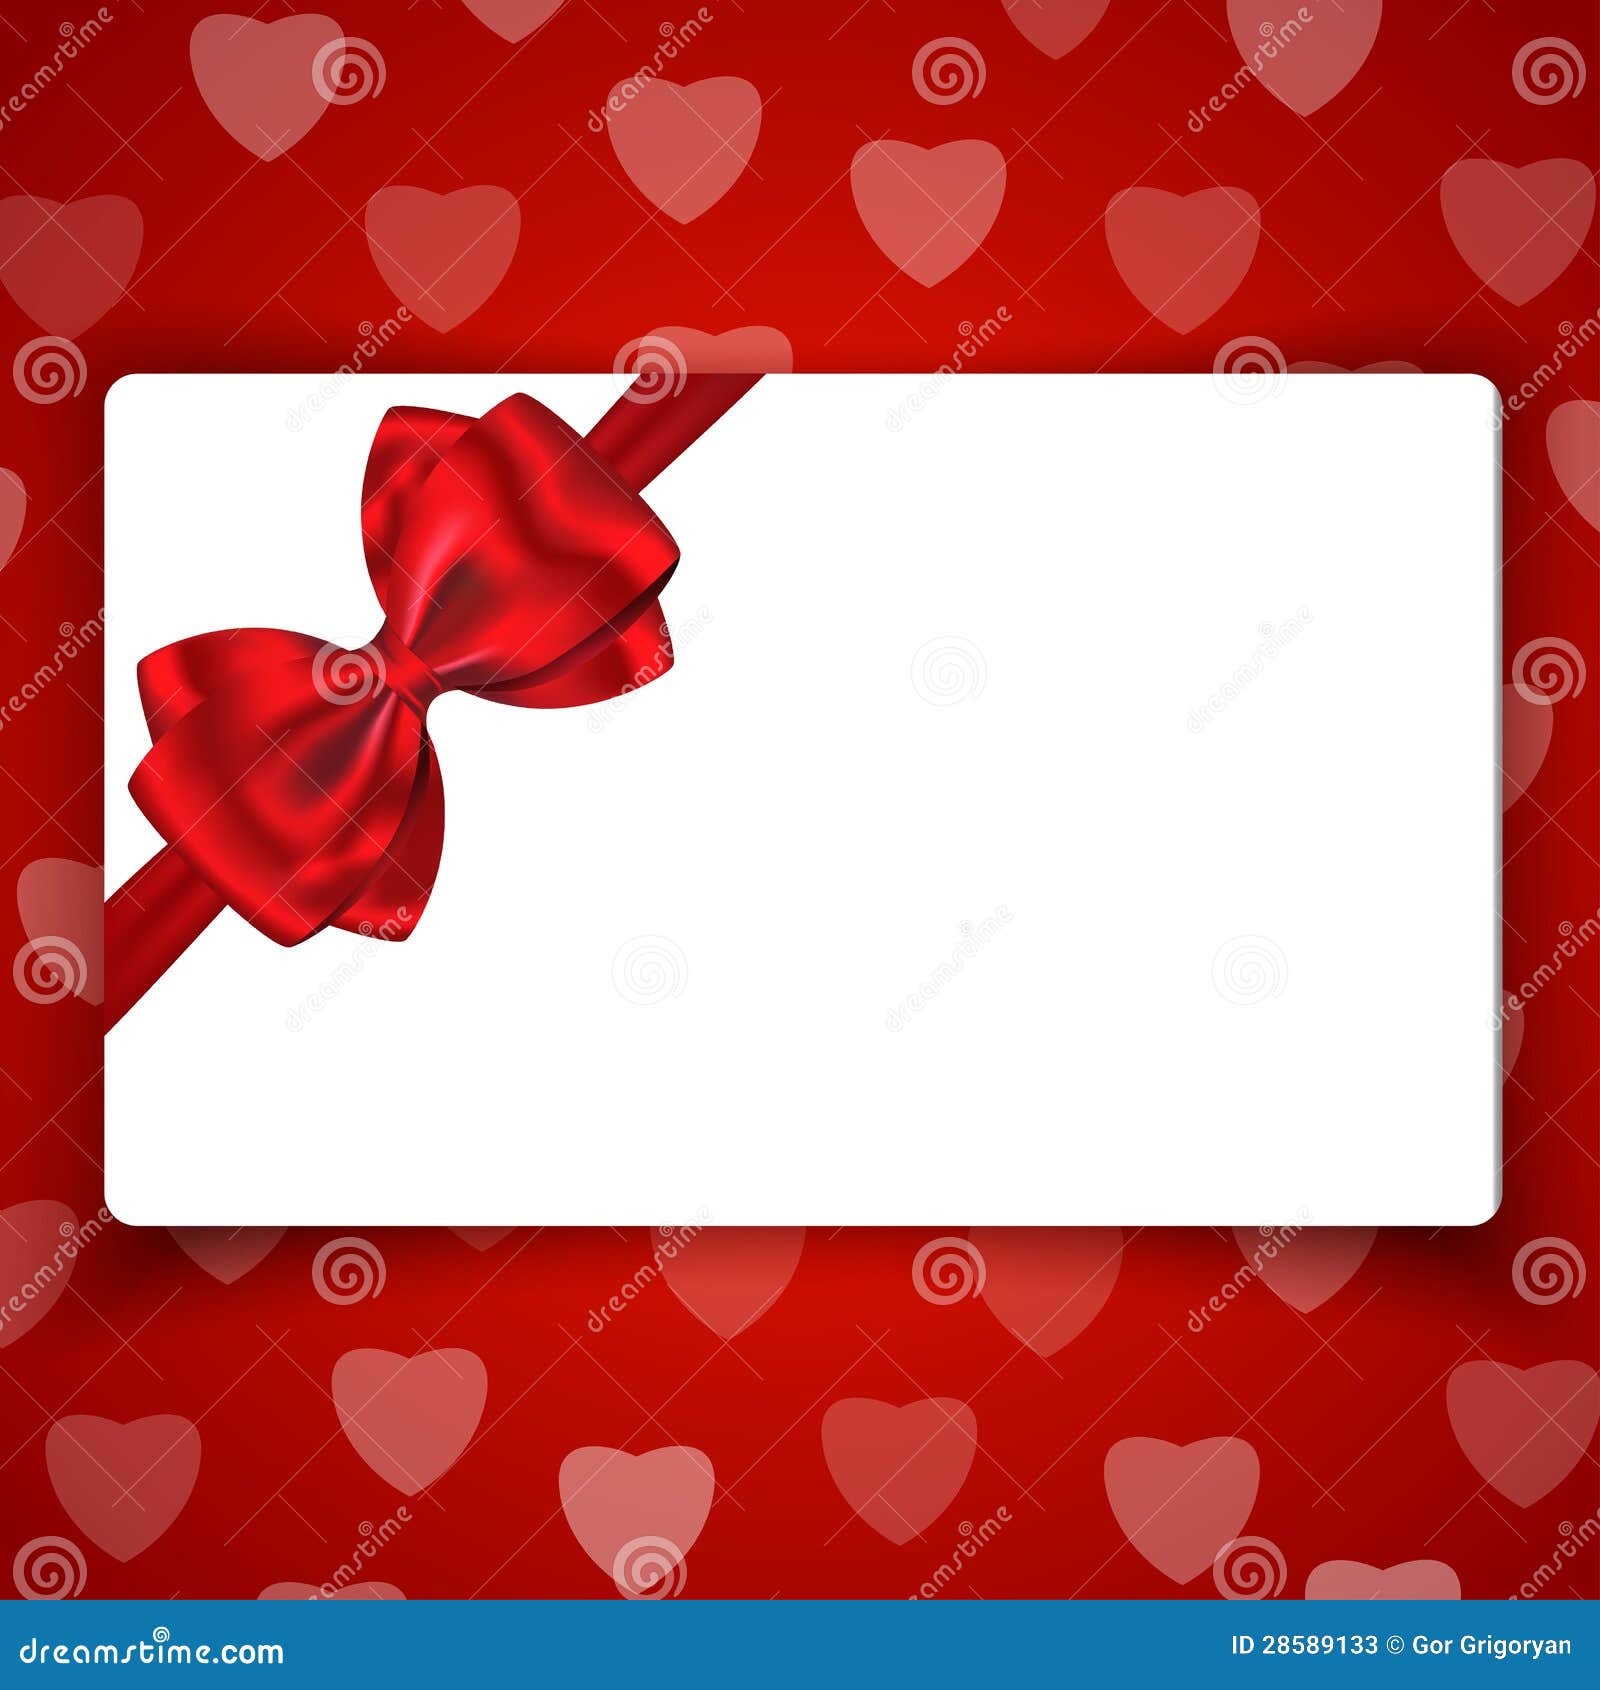 Love Gift Card With Blank Space For Greetings Stock Photos - Image: 285891331300 x 1390